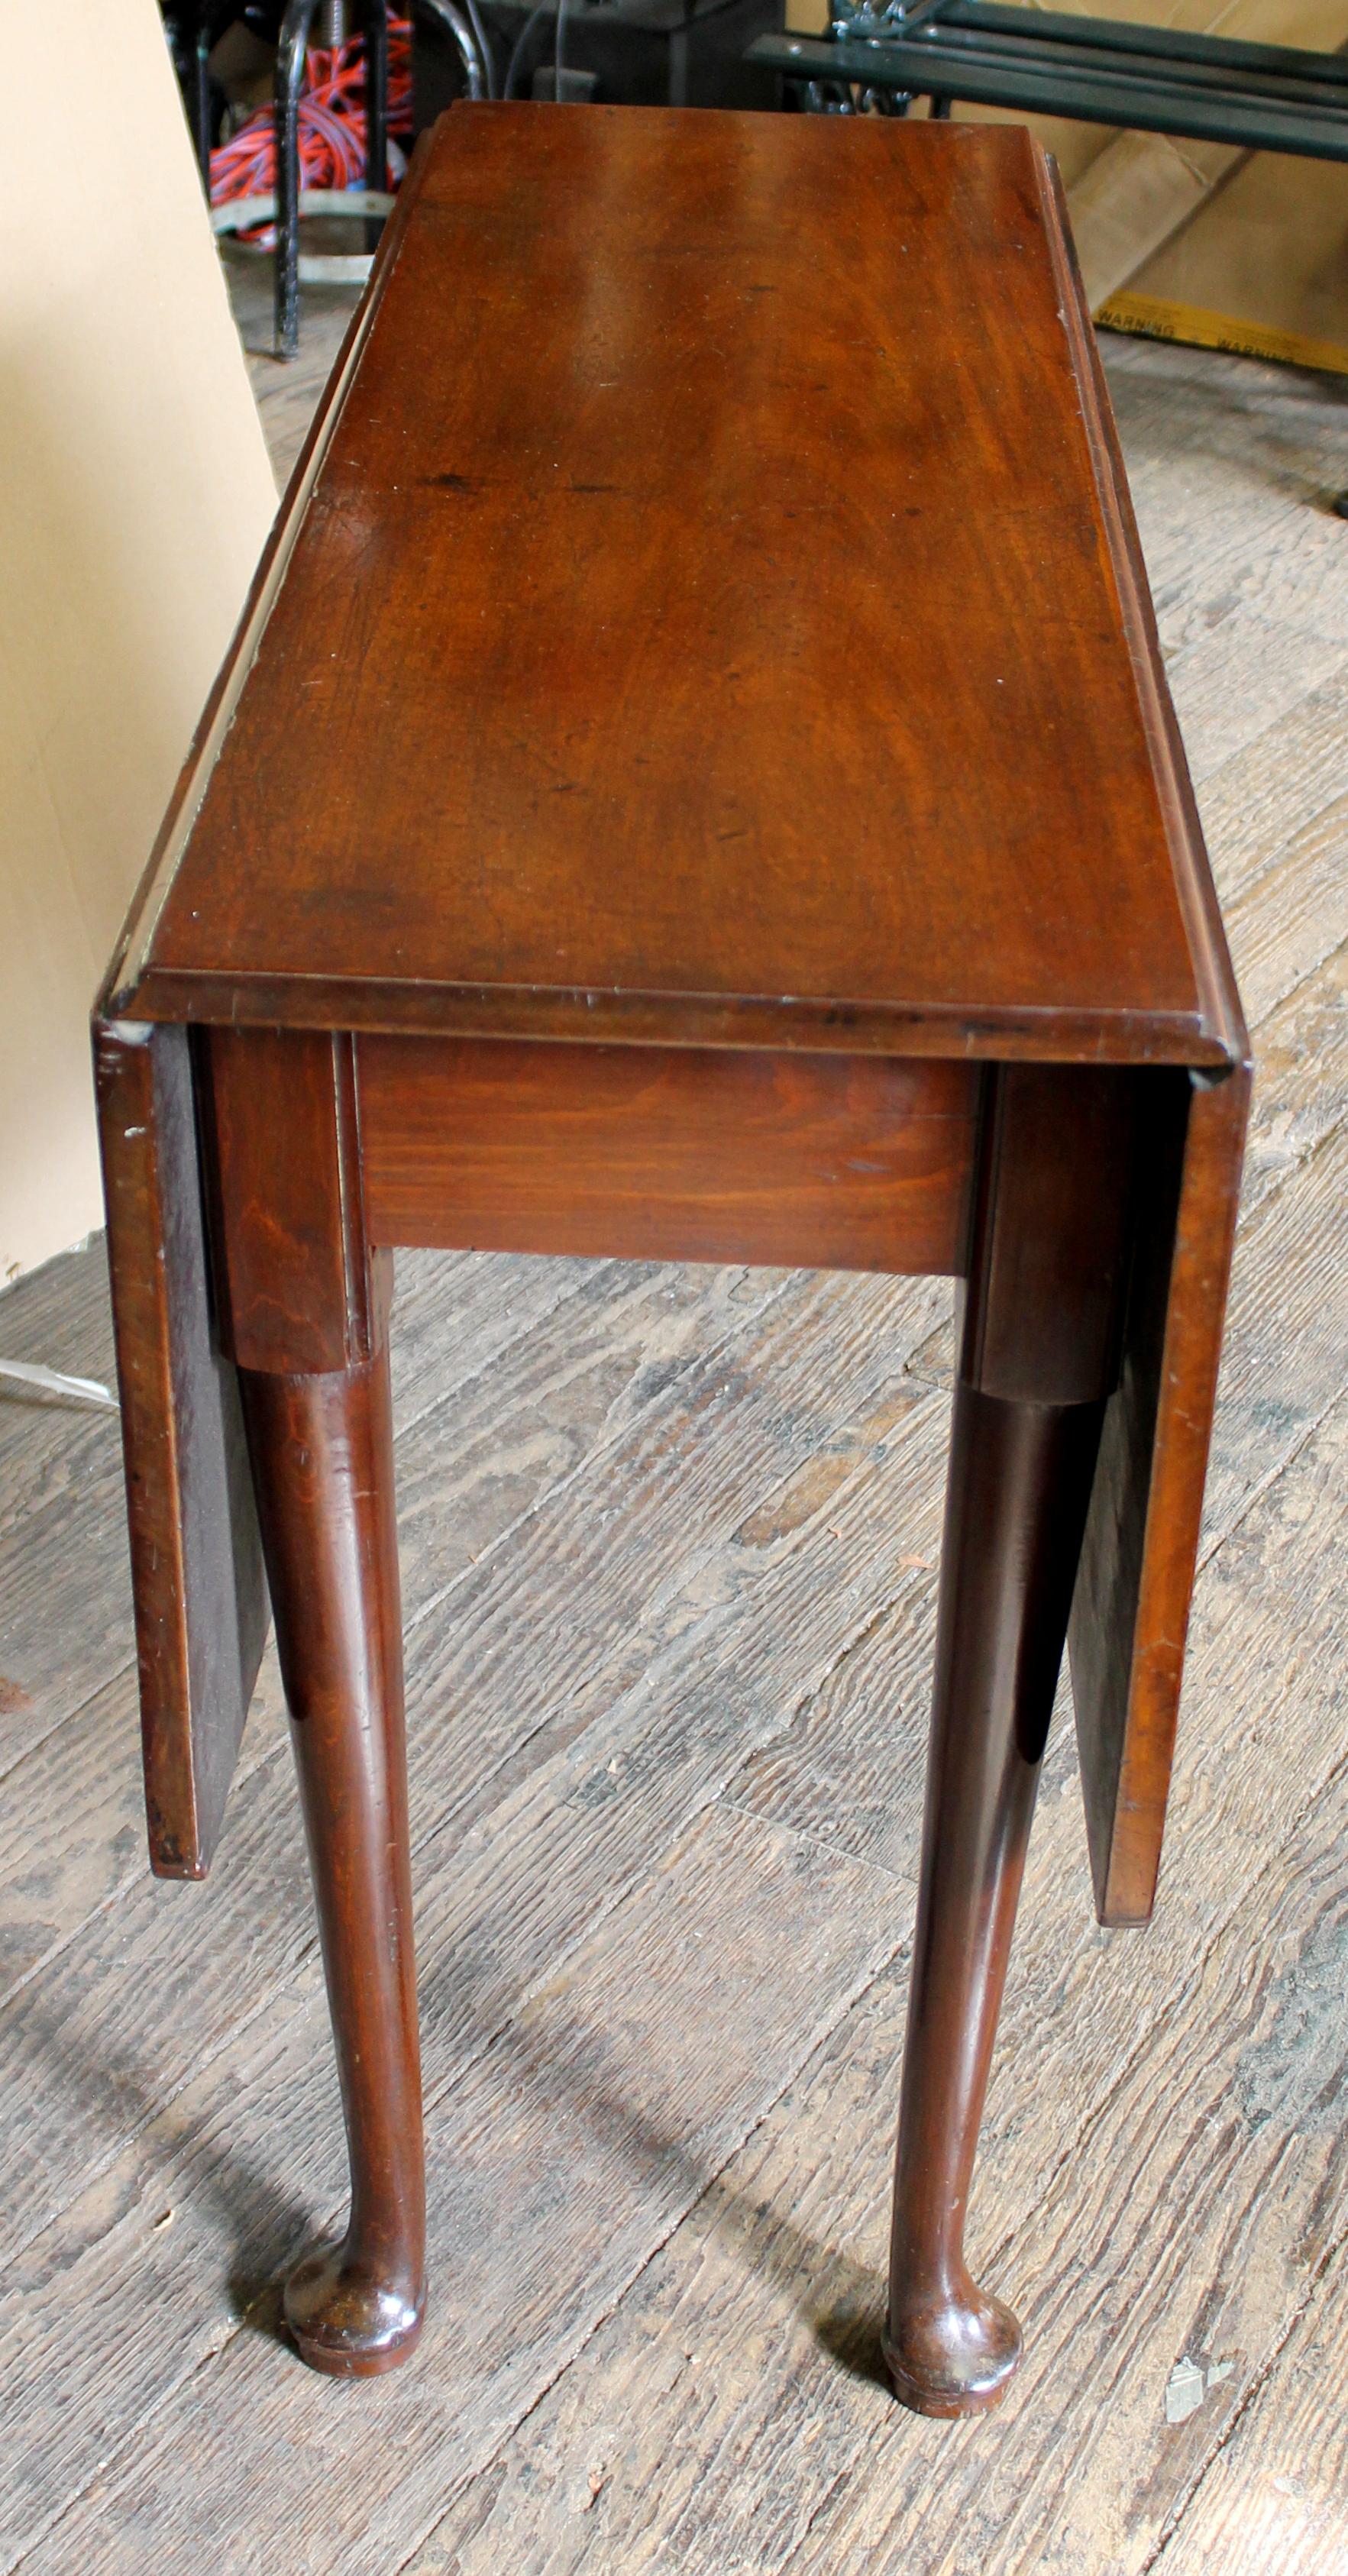 Hand-Crafted Antique American Federal Period Solid Mahogany Queen Anne Style Drop-Leaf Table